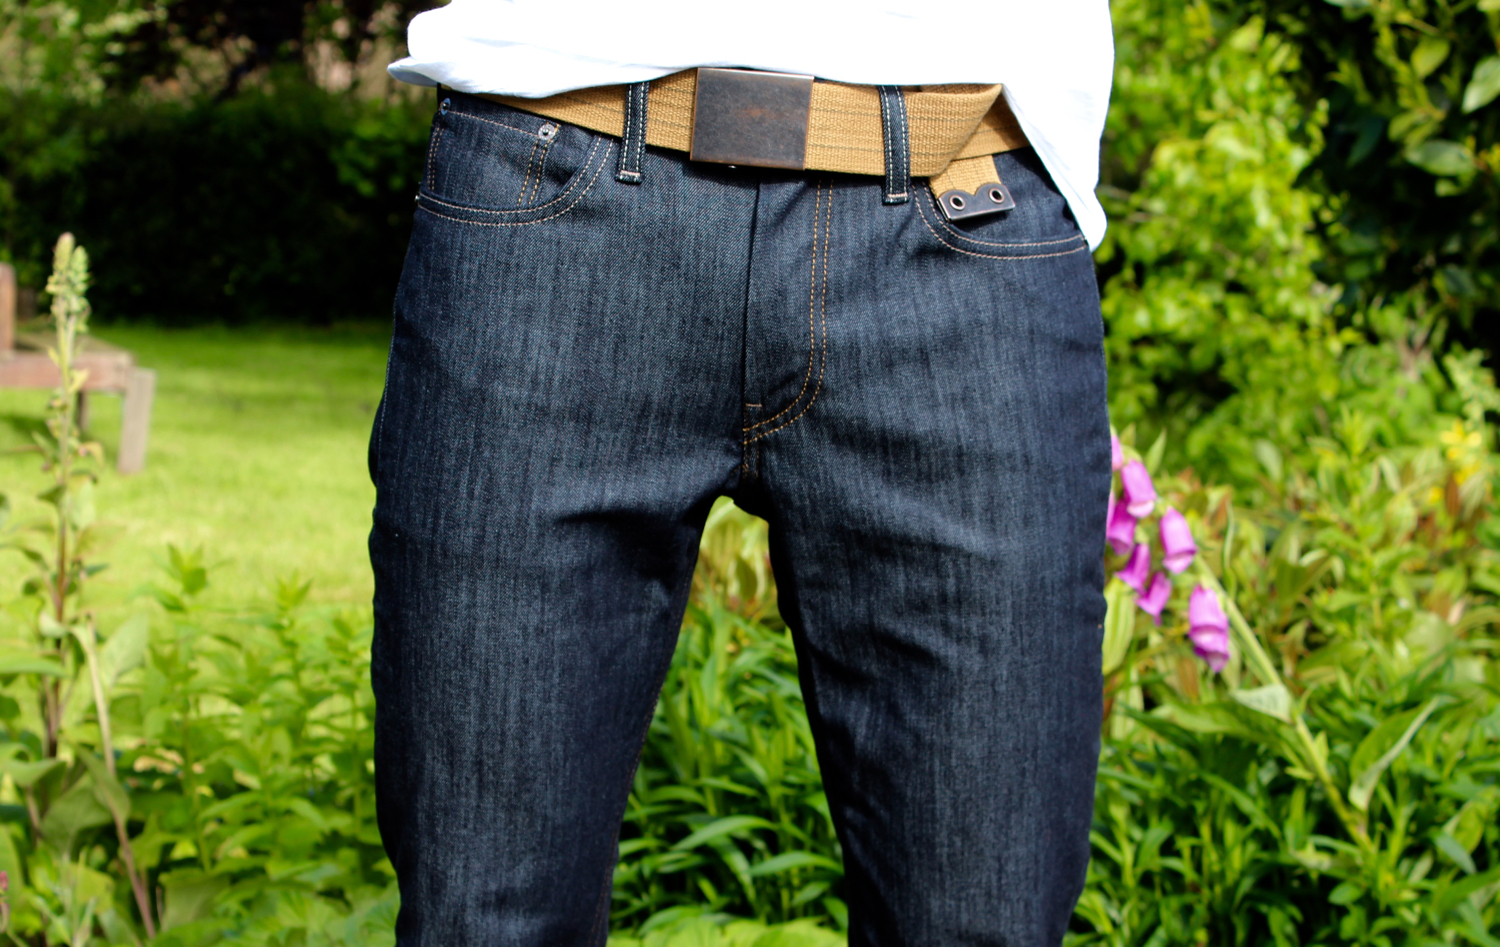 Review: Levi's 511 Slim Fit Commuter Jeans and Tee